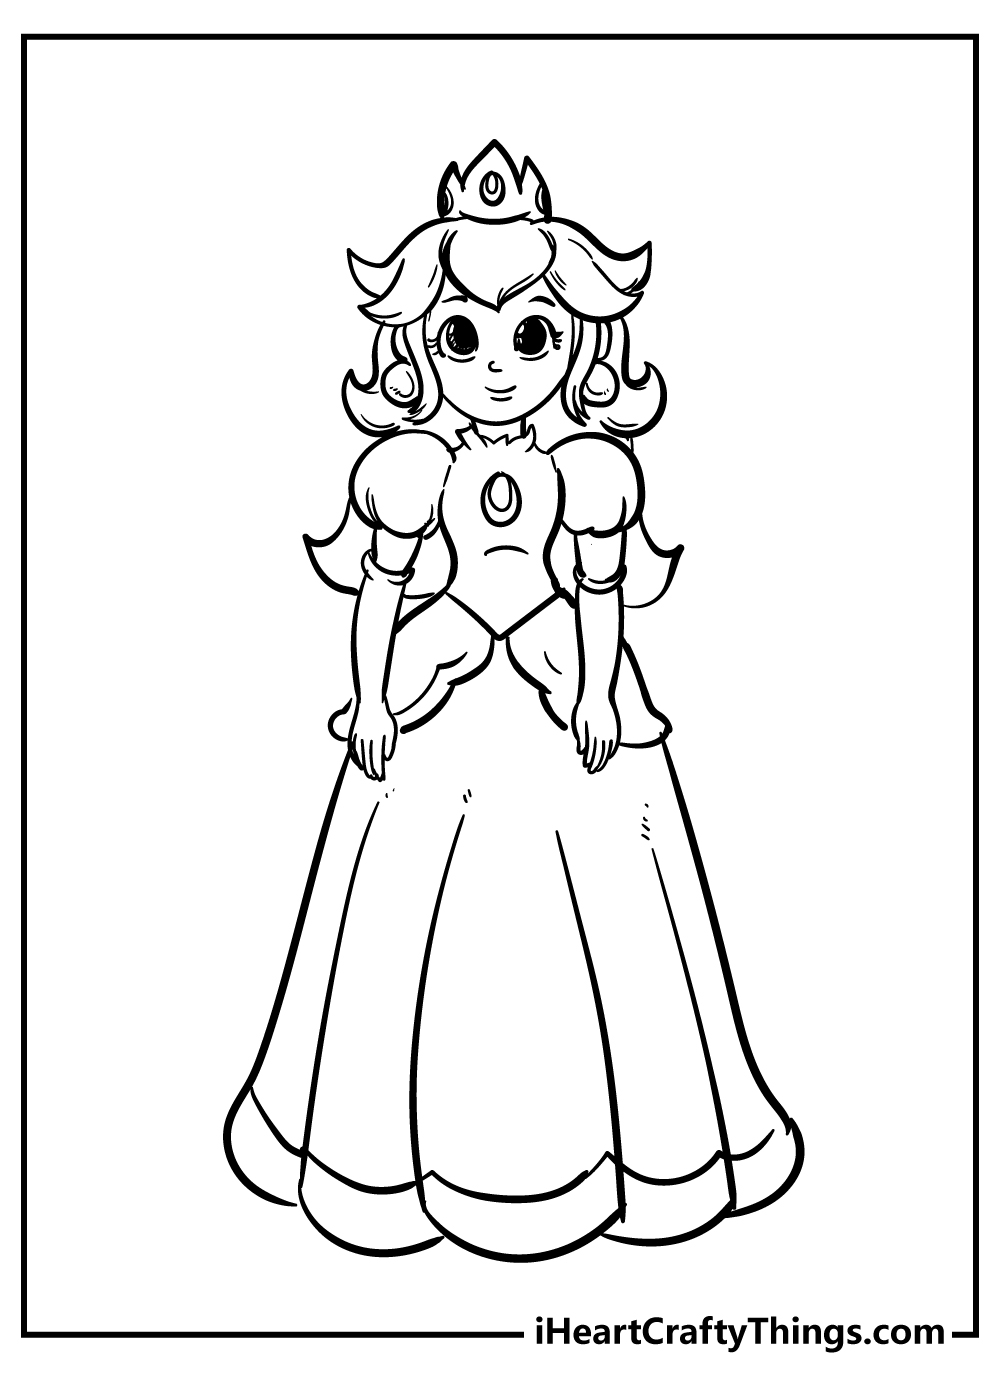 Princess Peach coloring pages free printable